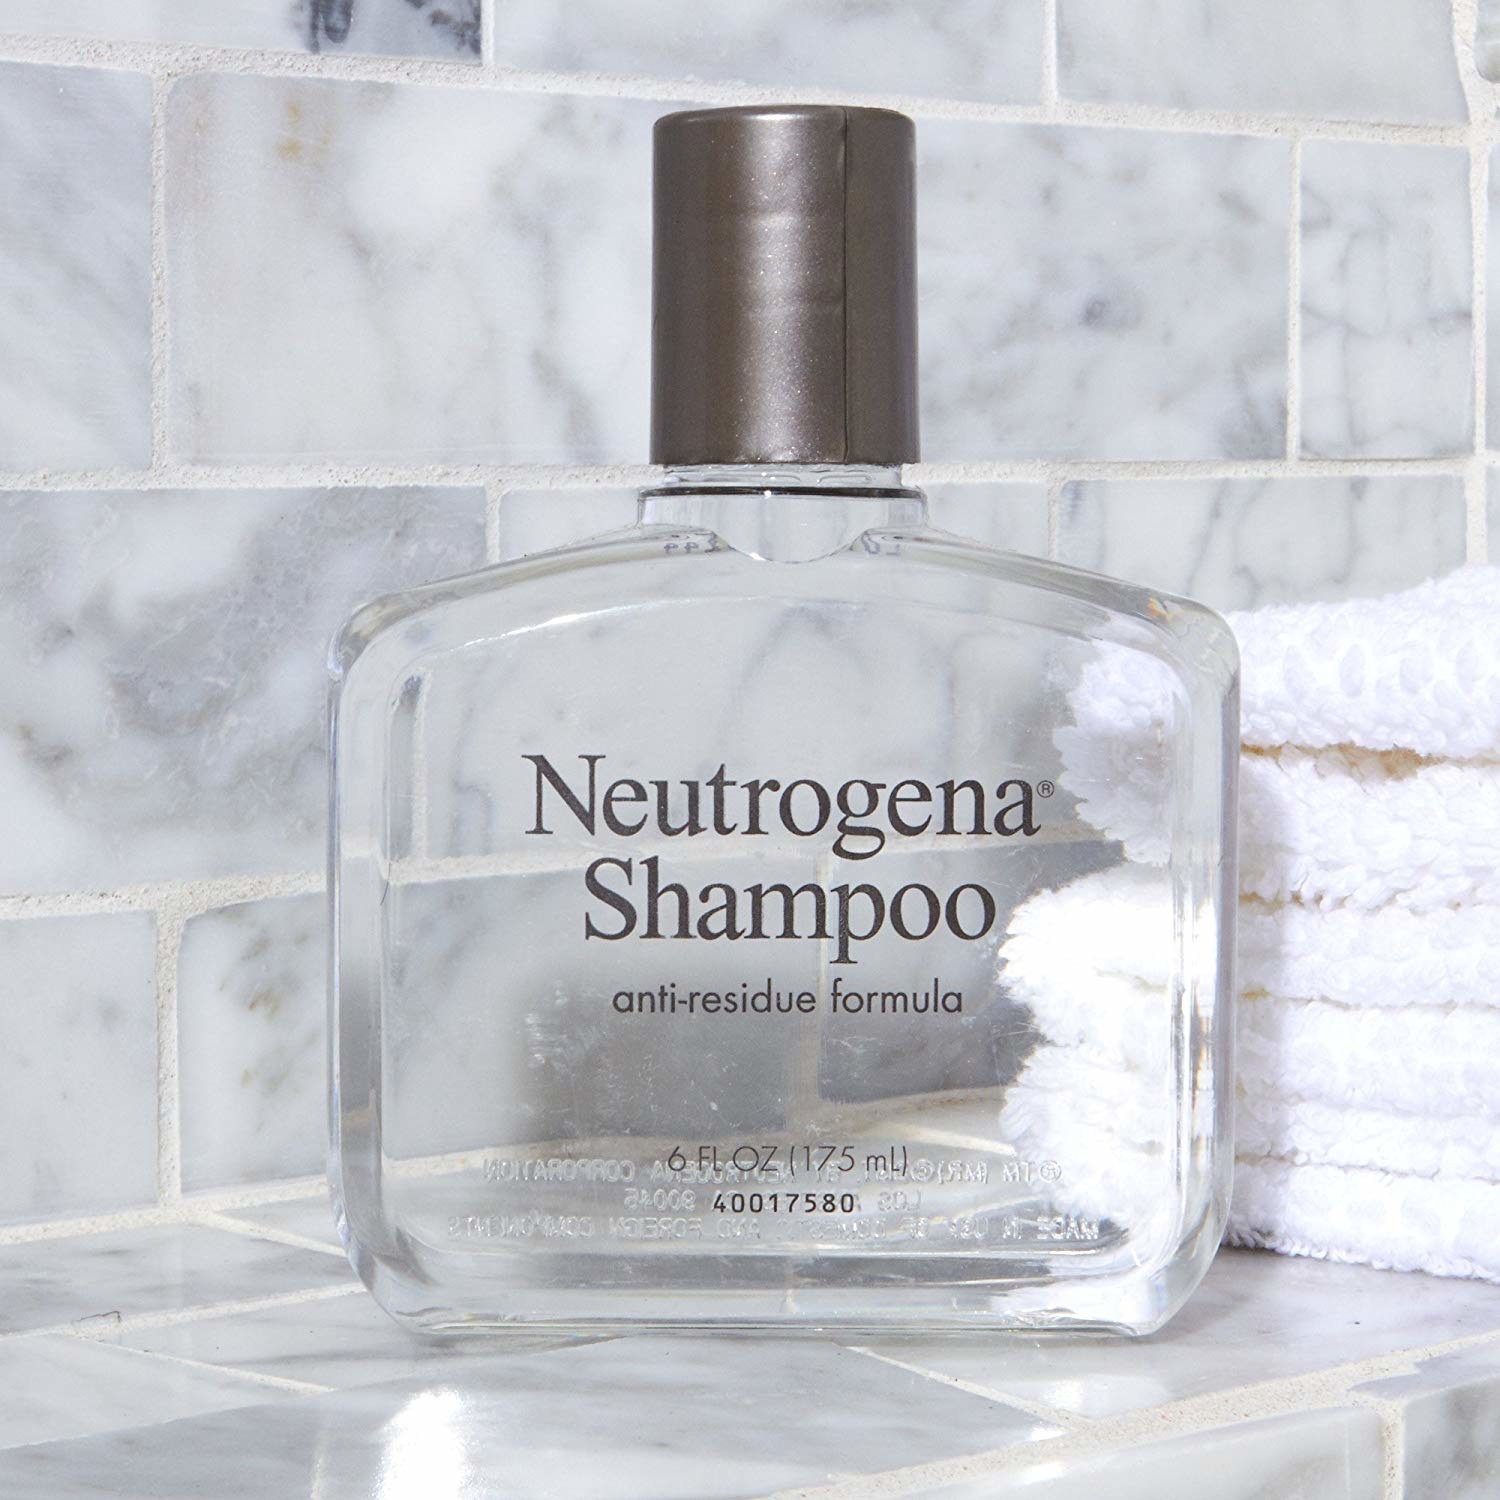 the bottle of shampoo in a shower